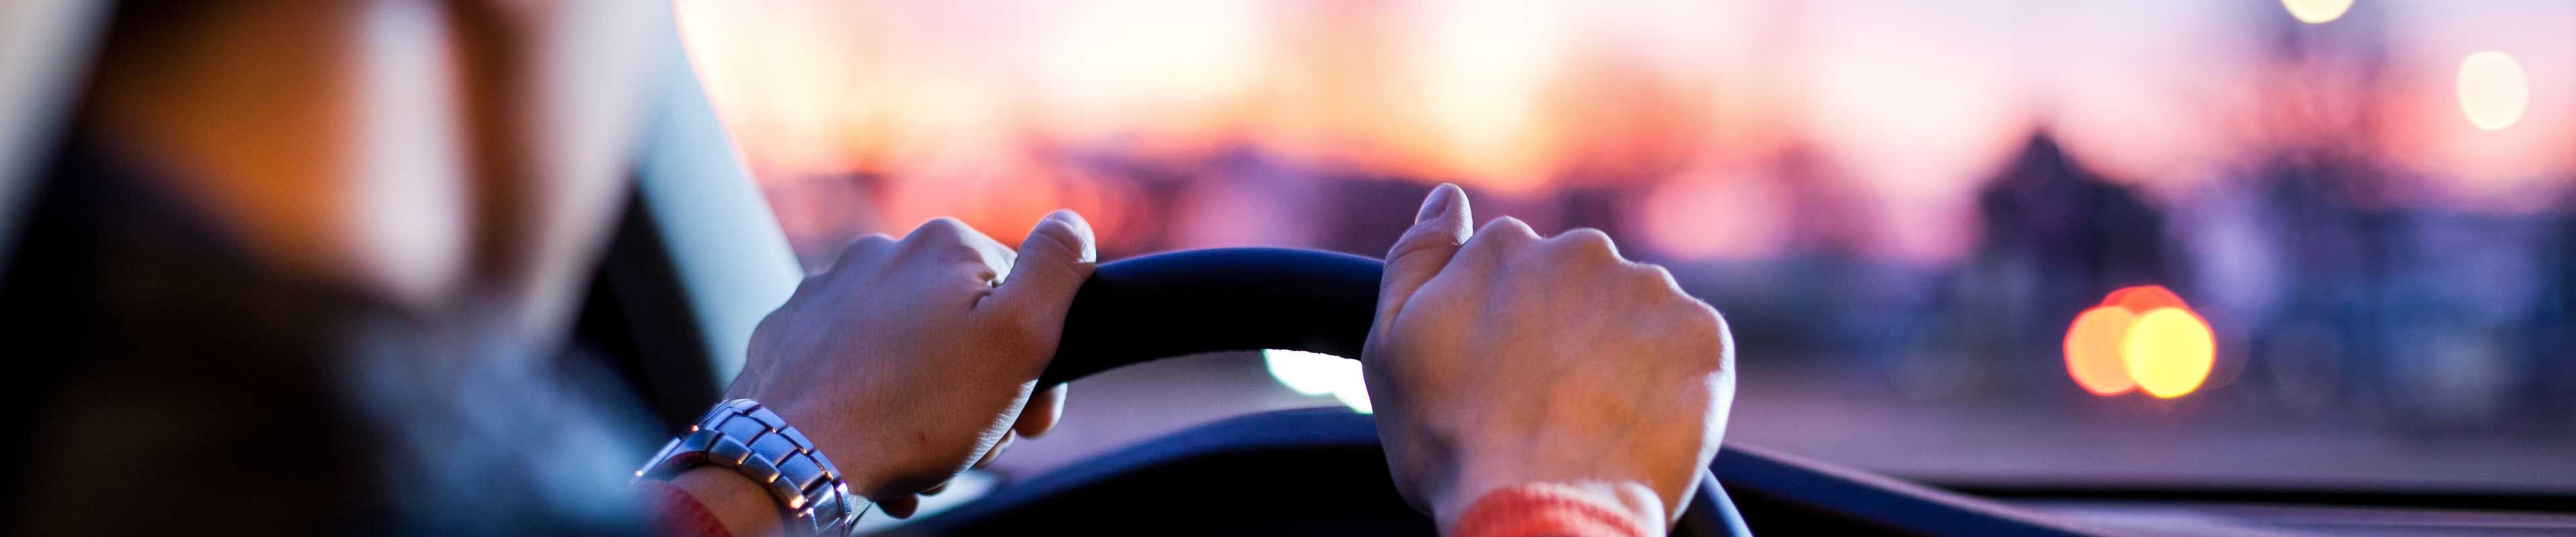 close up shot of hands on a steering wheel